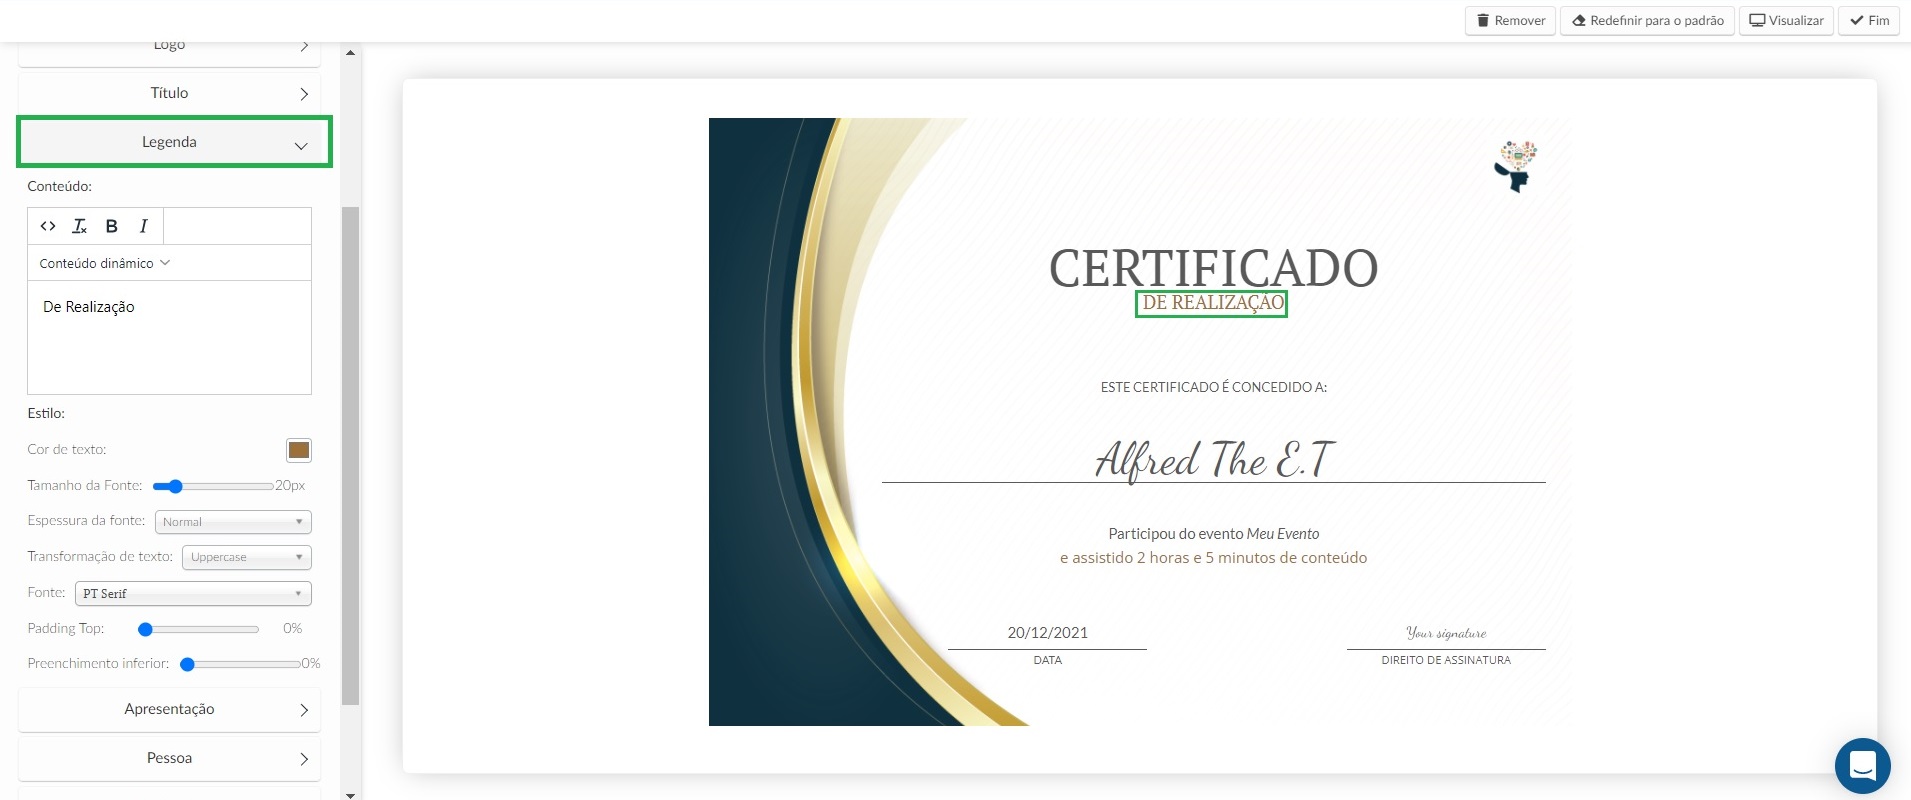 Customizing the subtitle of the certificate